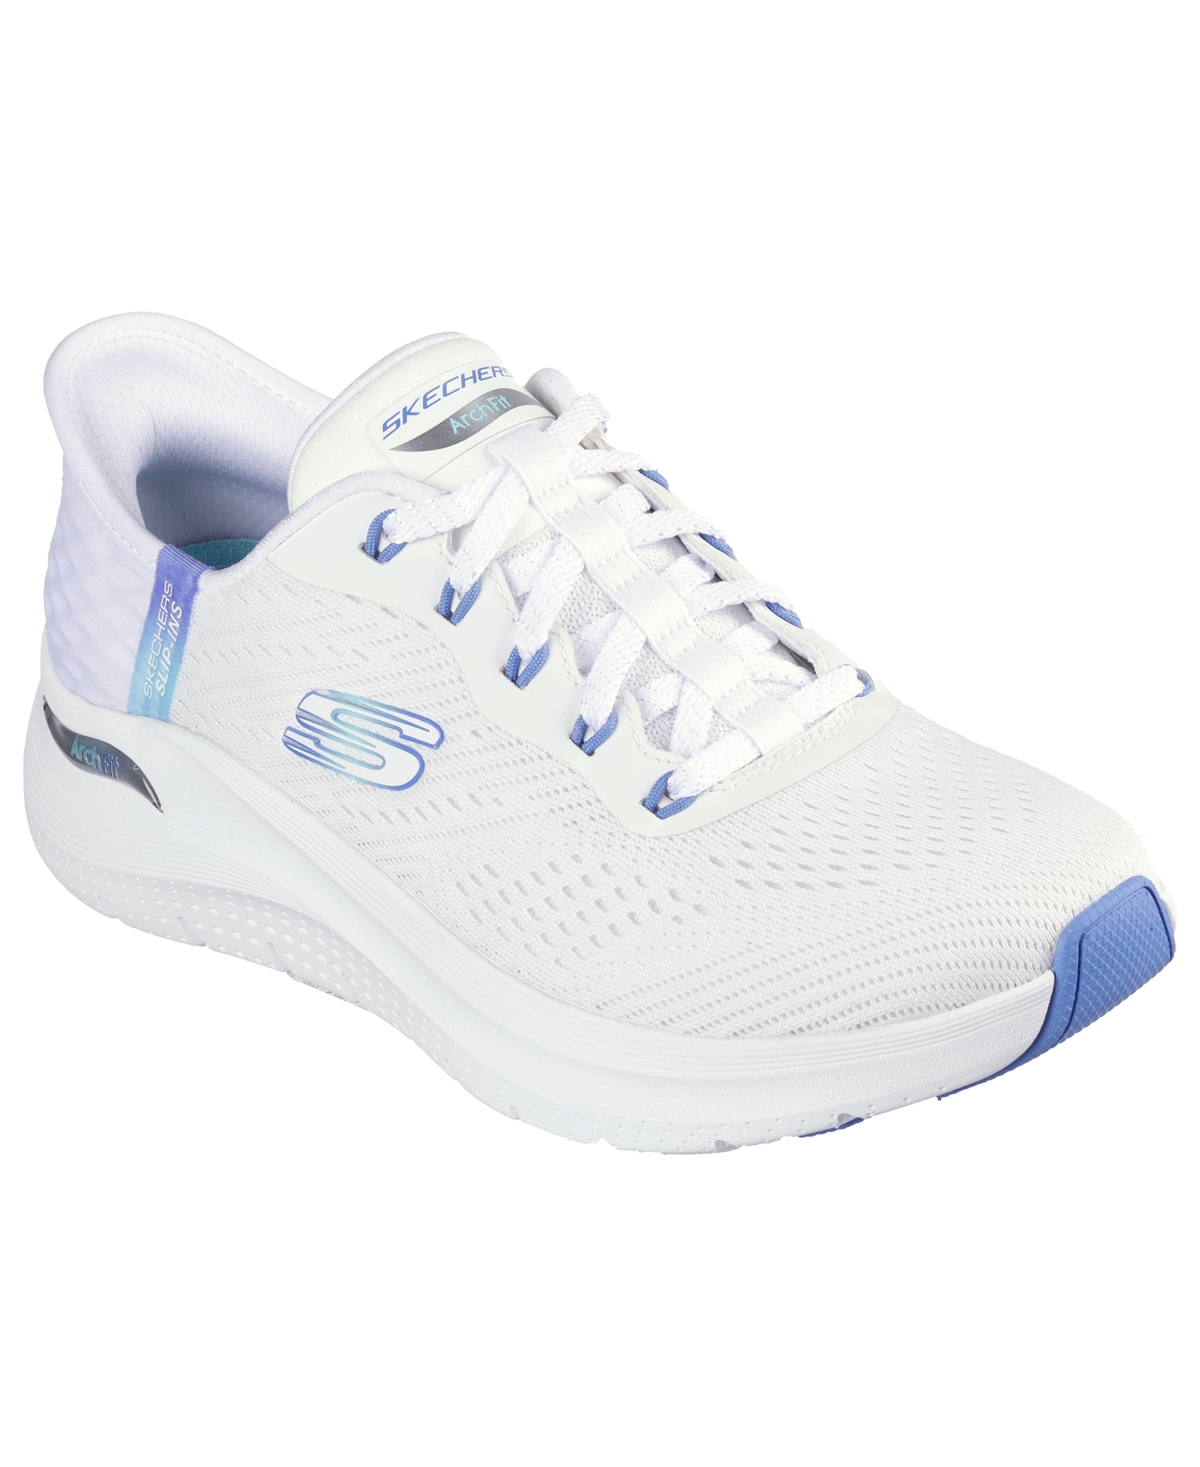 Women's Slip-ins Arch Fit 2.0 - Easy Chic Walking Sneakers from Finish Line - Wbl-white/